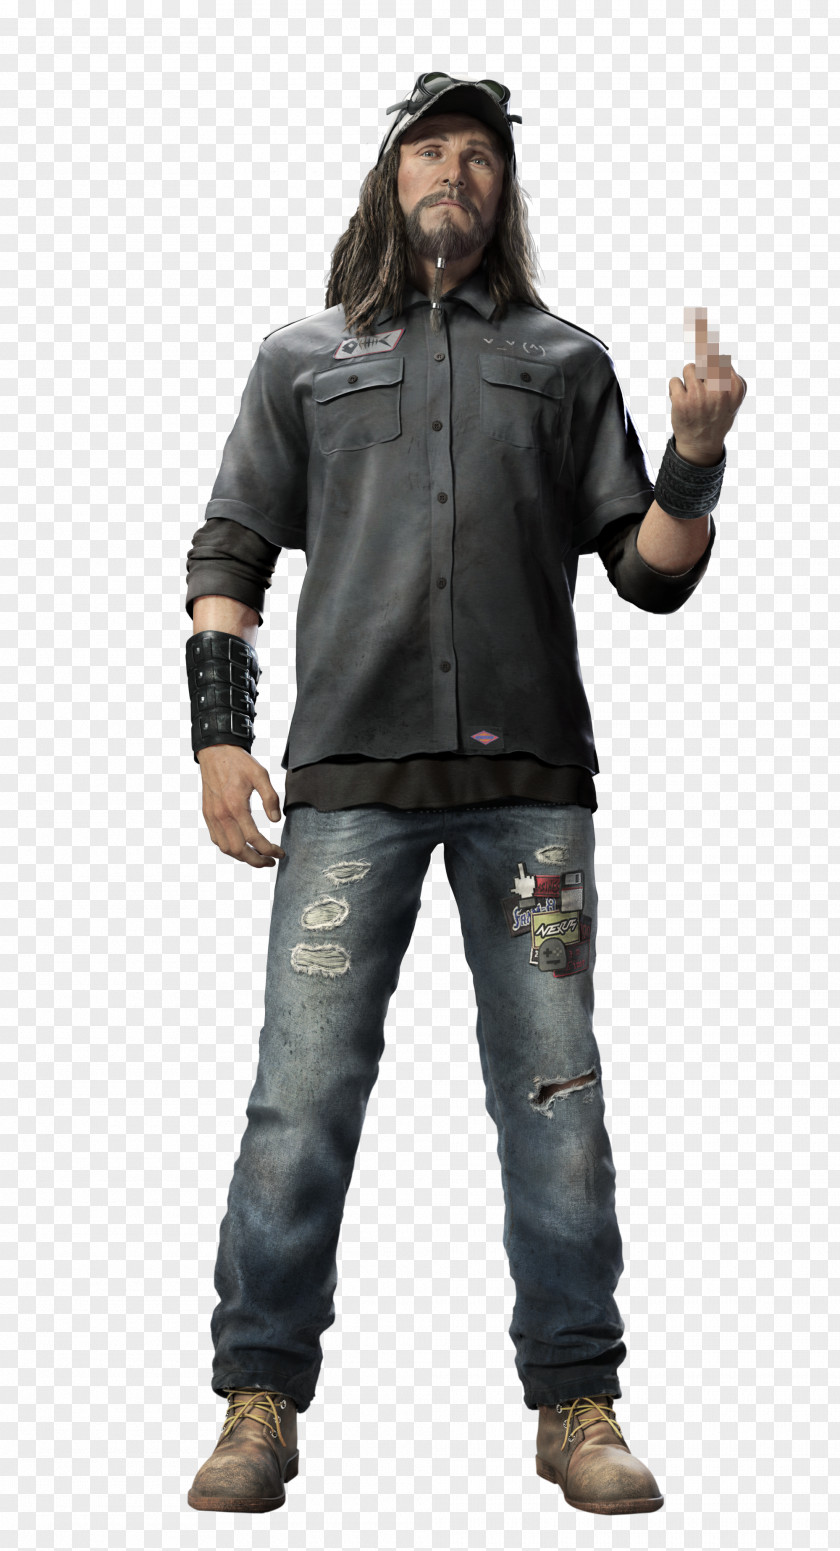 Watch Dogs 2 PlayStation 3 Video Game PNG